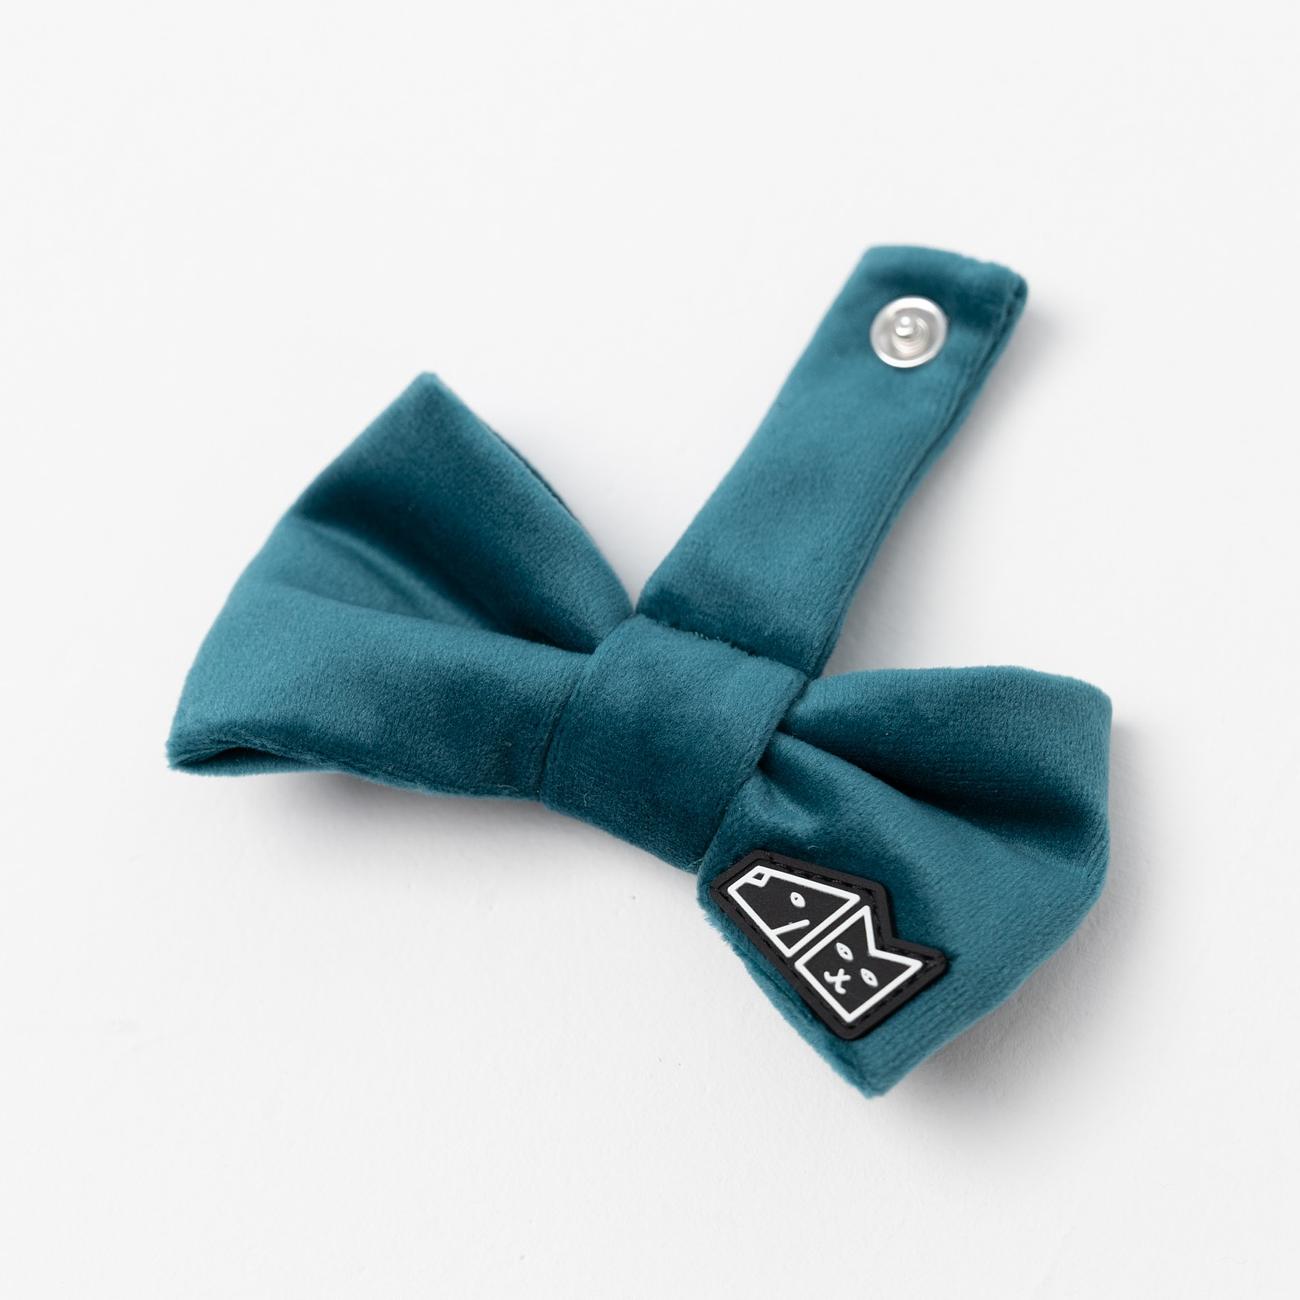 Bow tie "Seems to be turquoise" 